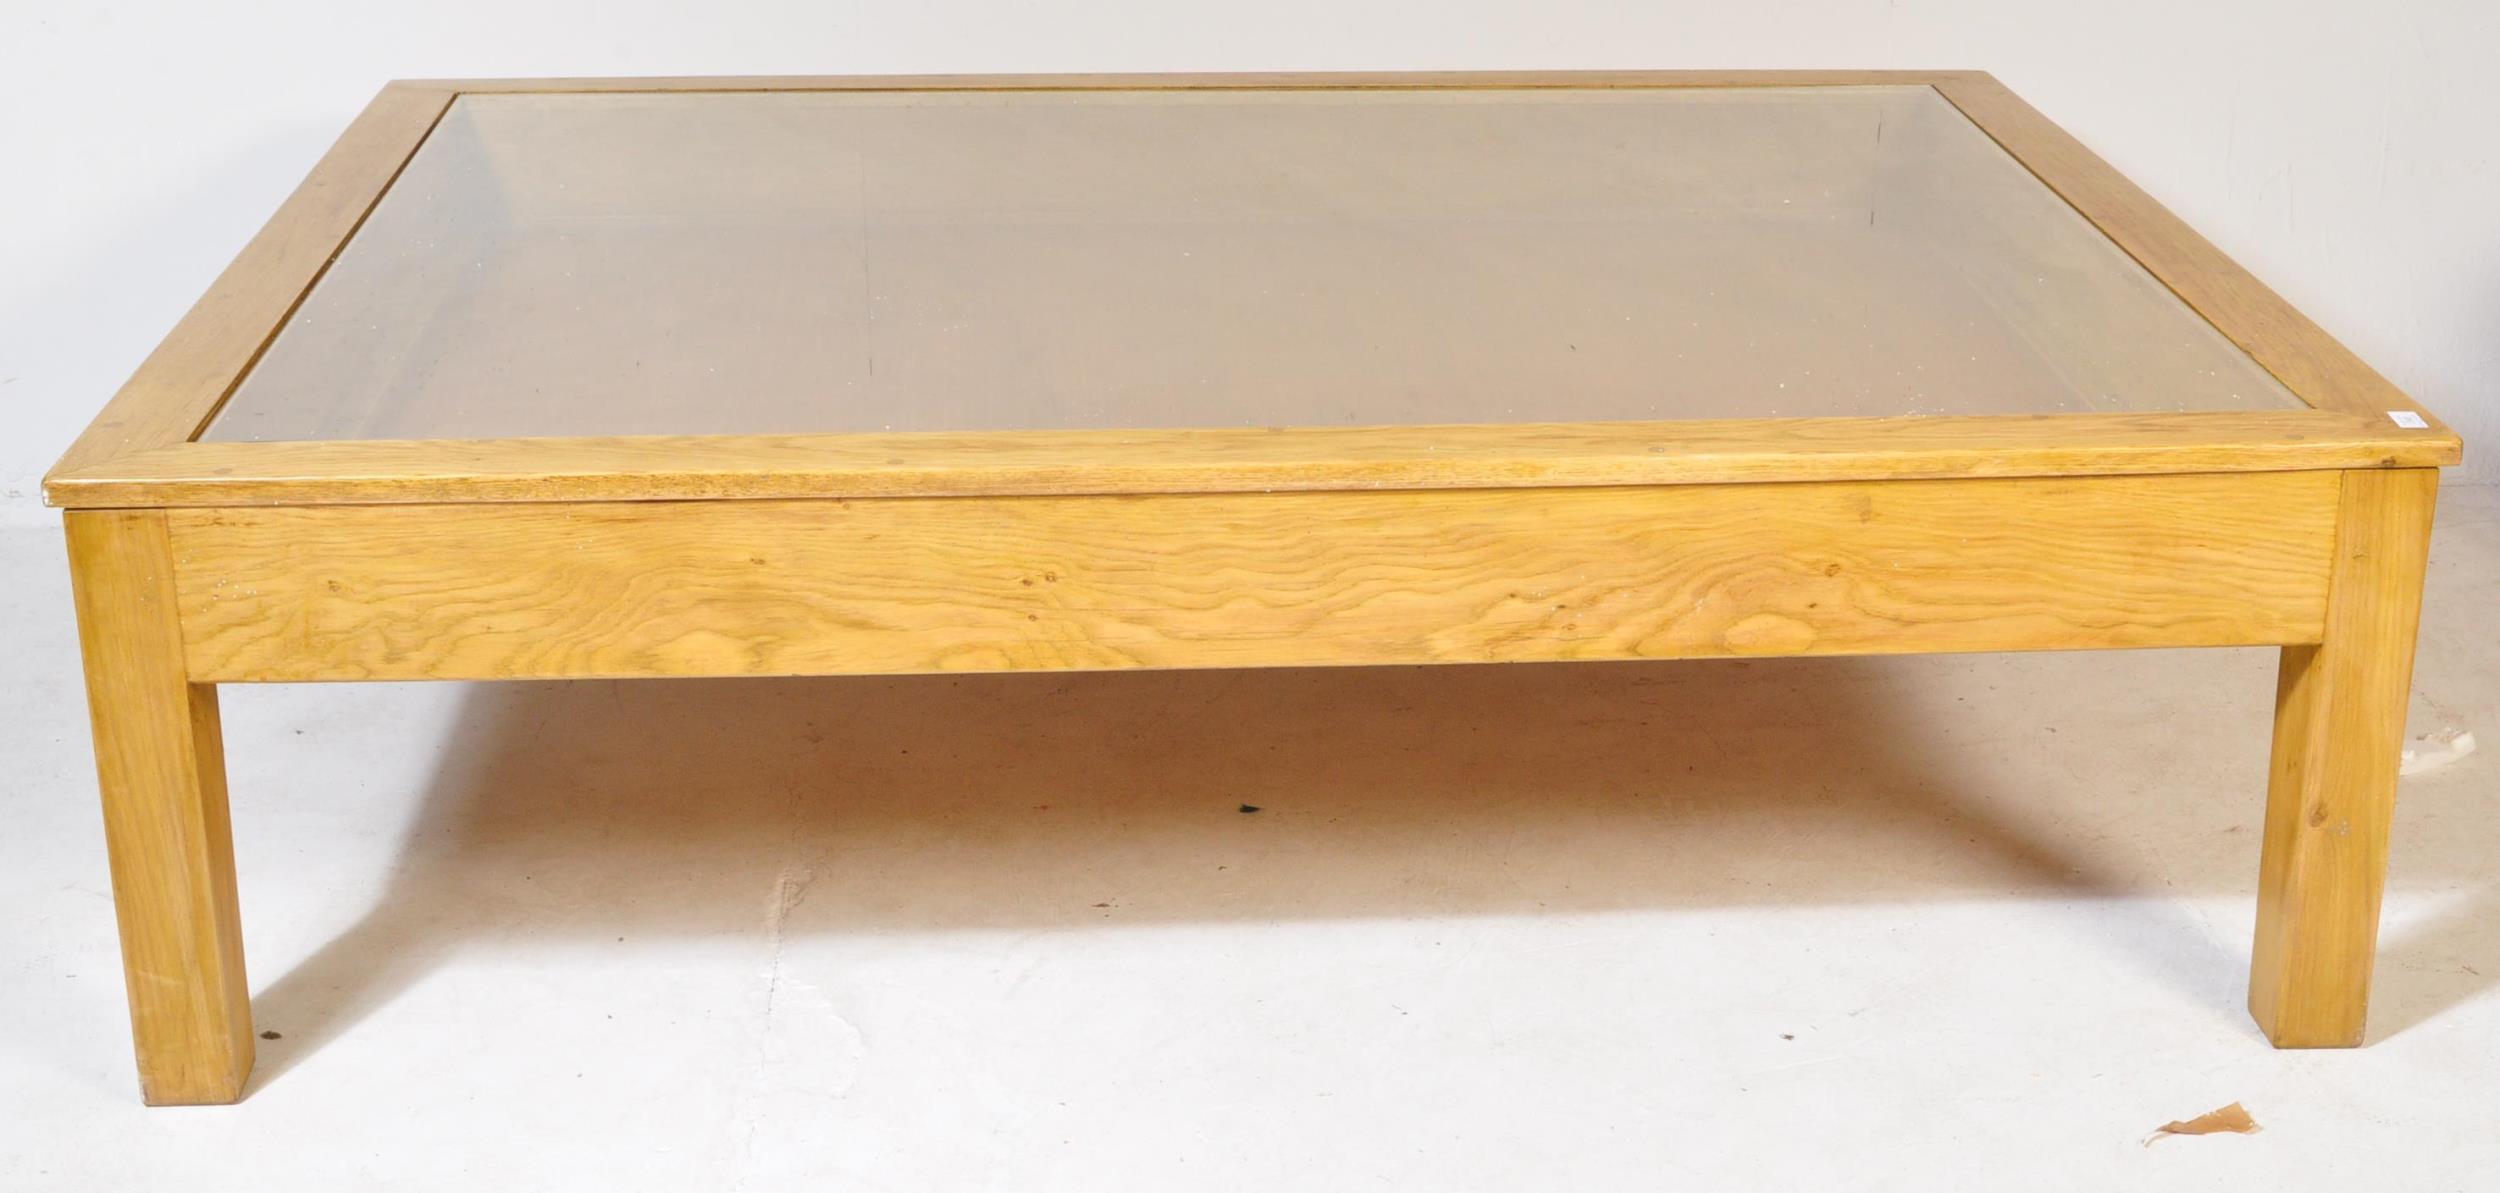 LARGE CONTEMPORARY OAK GLAZED COFFEE TABLE - Image 3 of 4